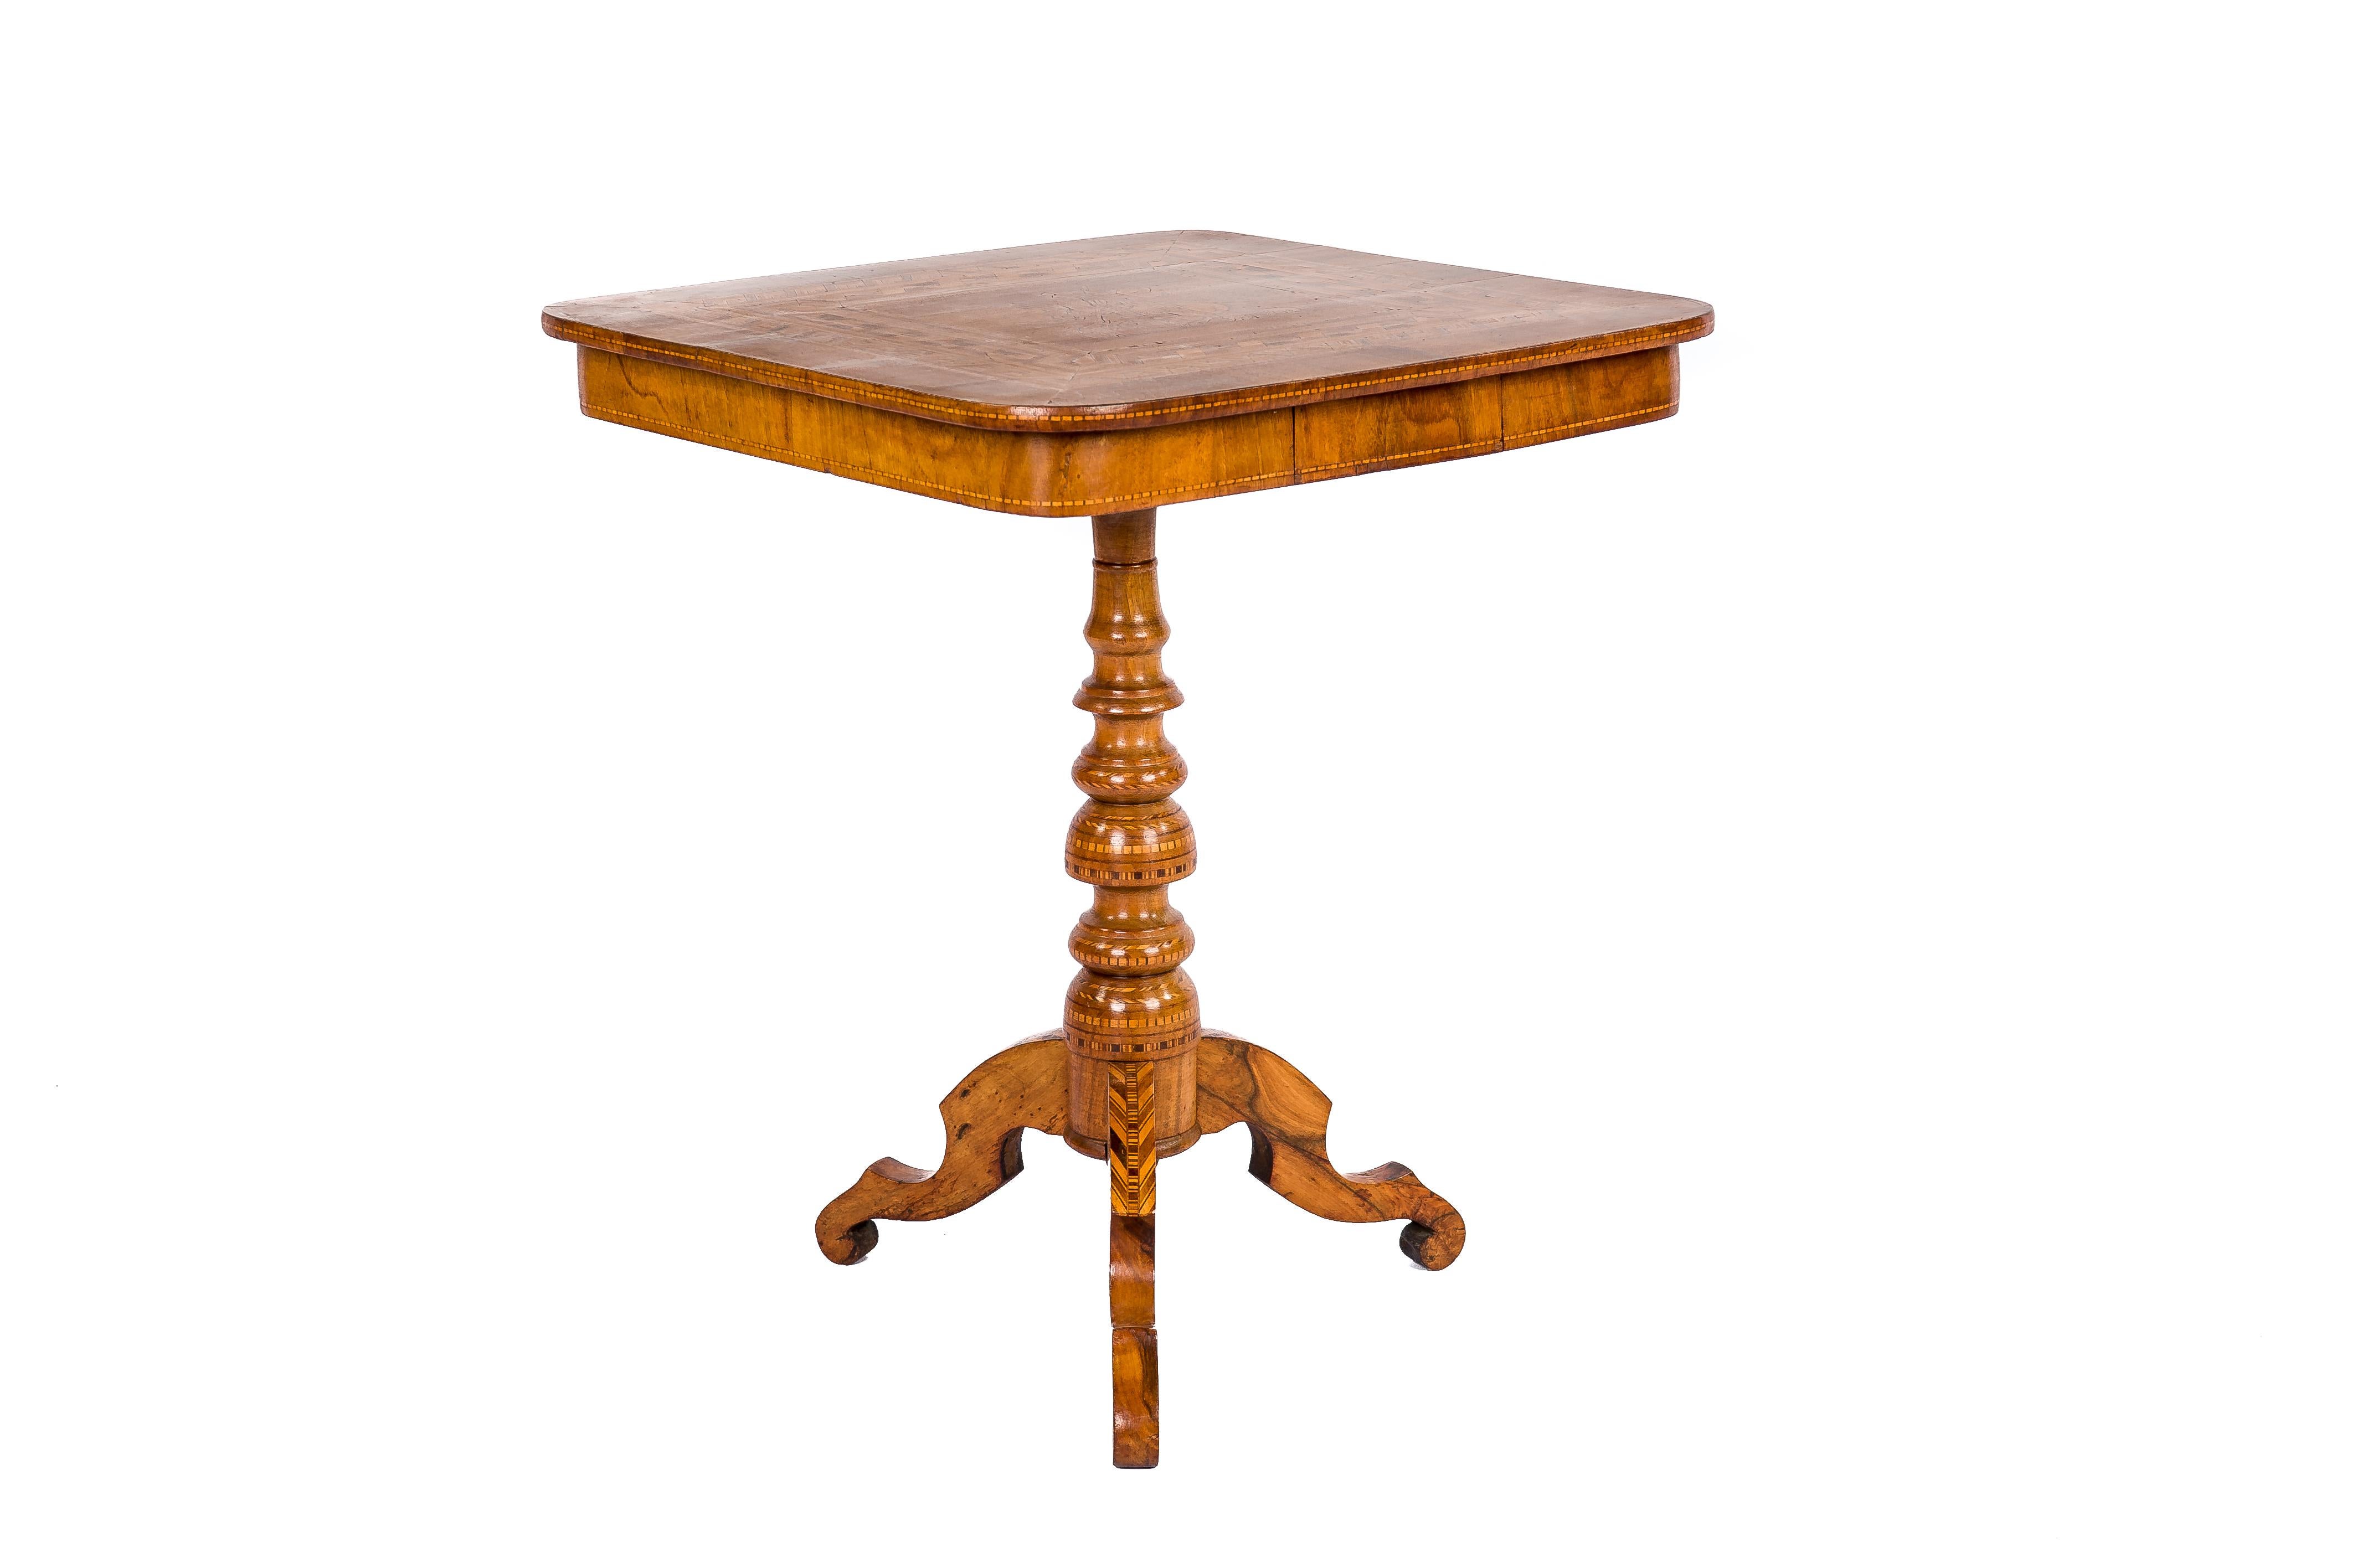 A beautiful tilt-top occasional table that was made in Italy, circa 1870. The table is heavily decorated with marquetry or intarsia that is made of various precious kinds of wood such as olive, walnut, mahogany, and fruitwood. The table has as 0,6